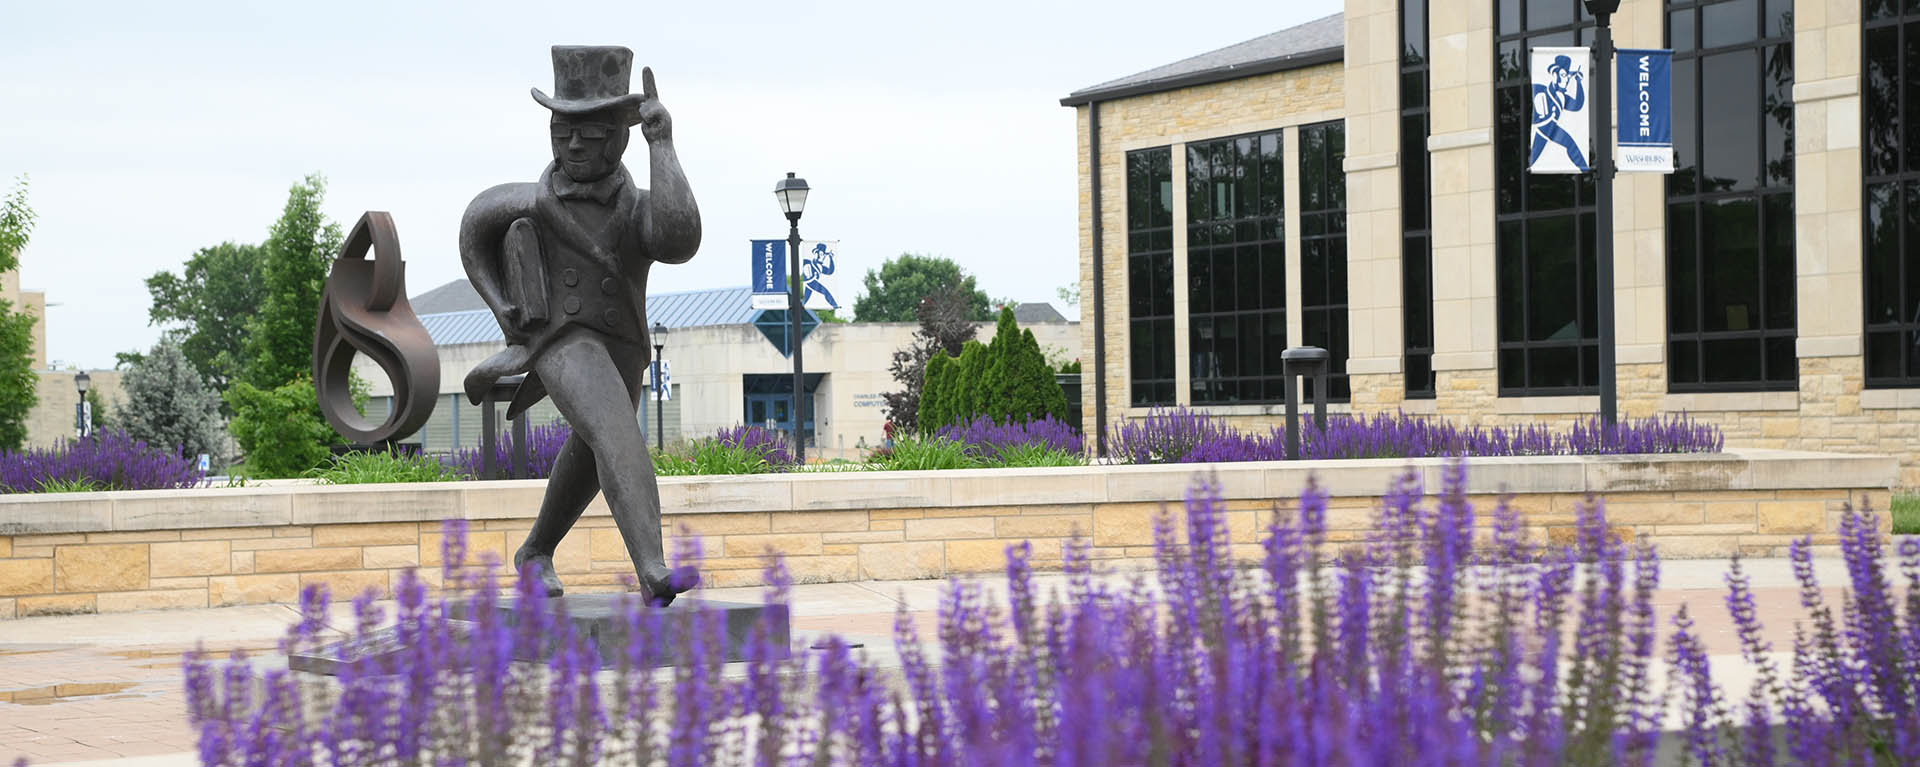 Purple flowers bloom in front of the Ichabod statue in front of Morgan Hall.